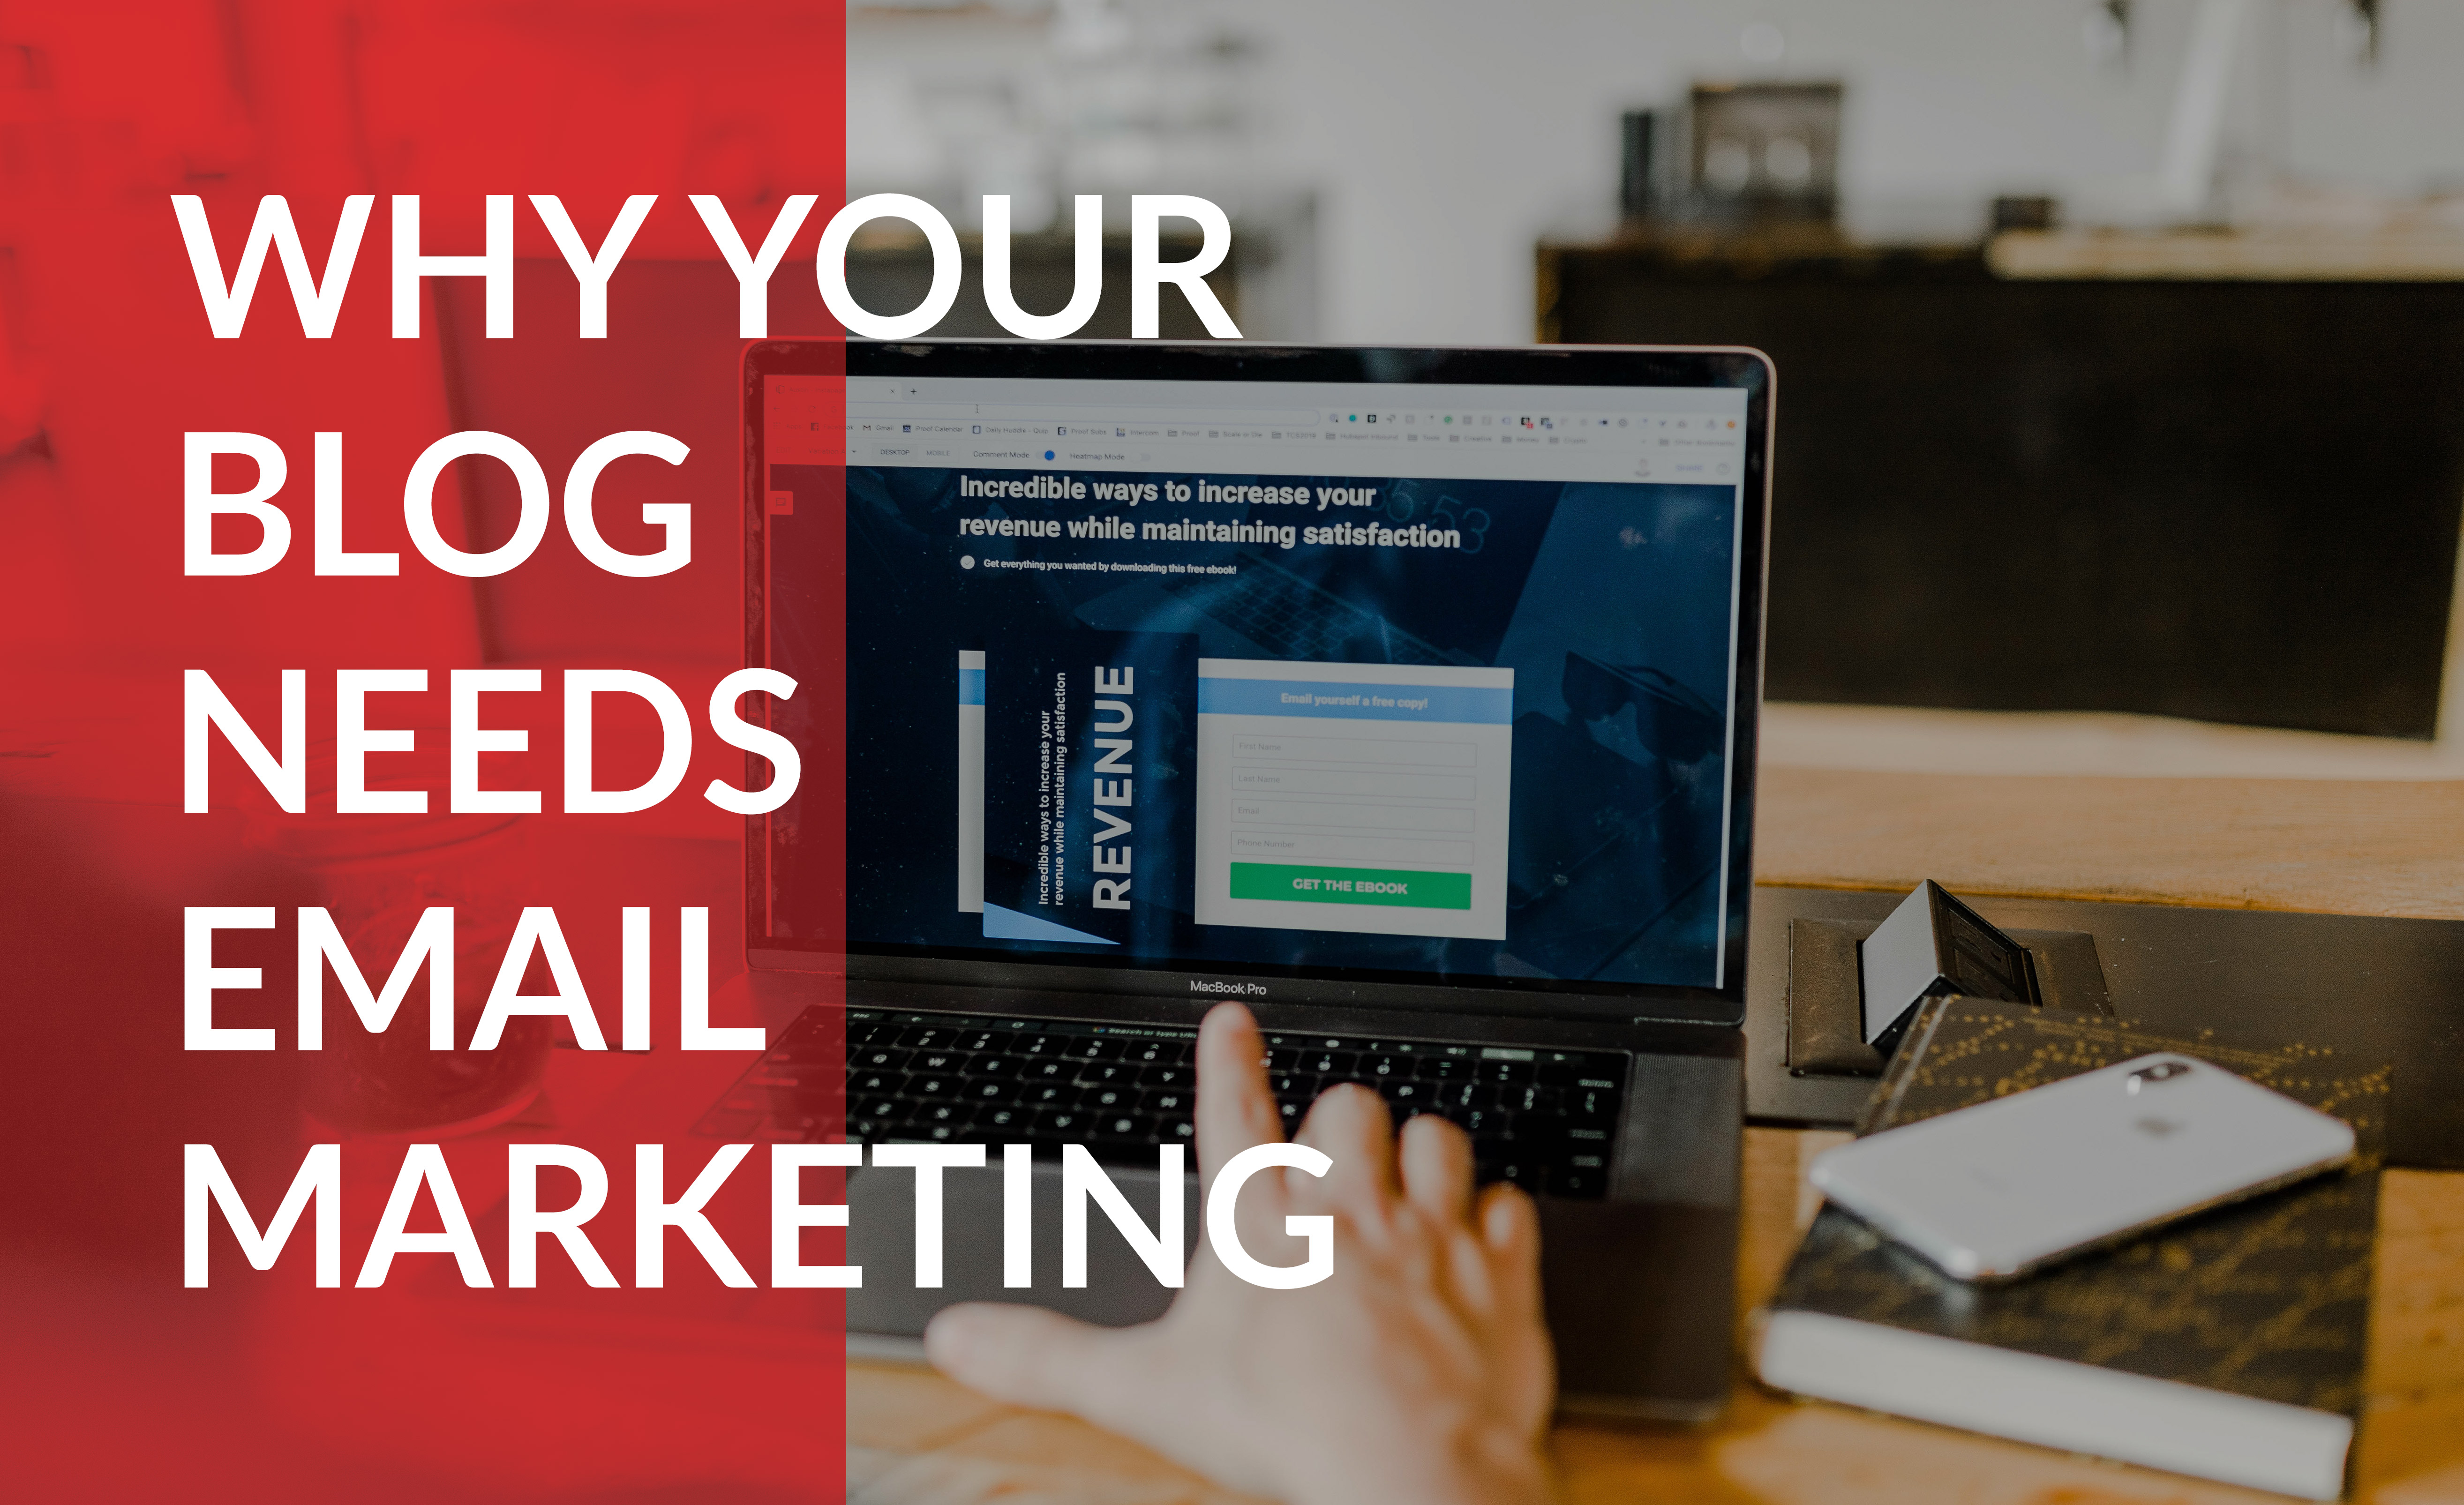 Why Your Blog Needs Email Marketing